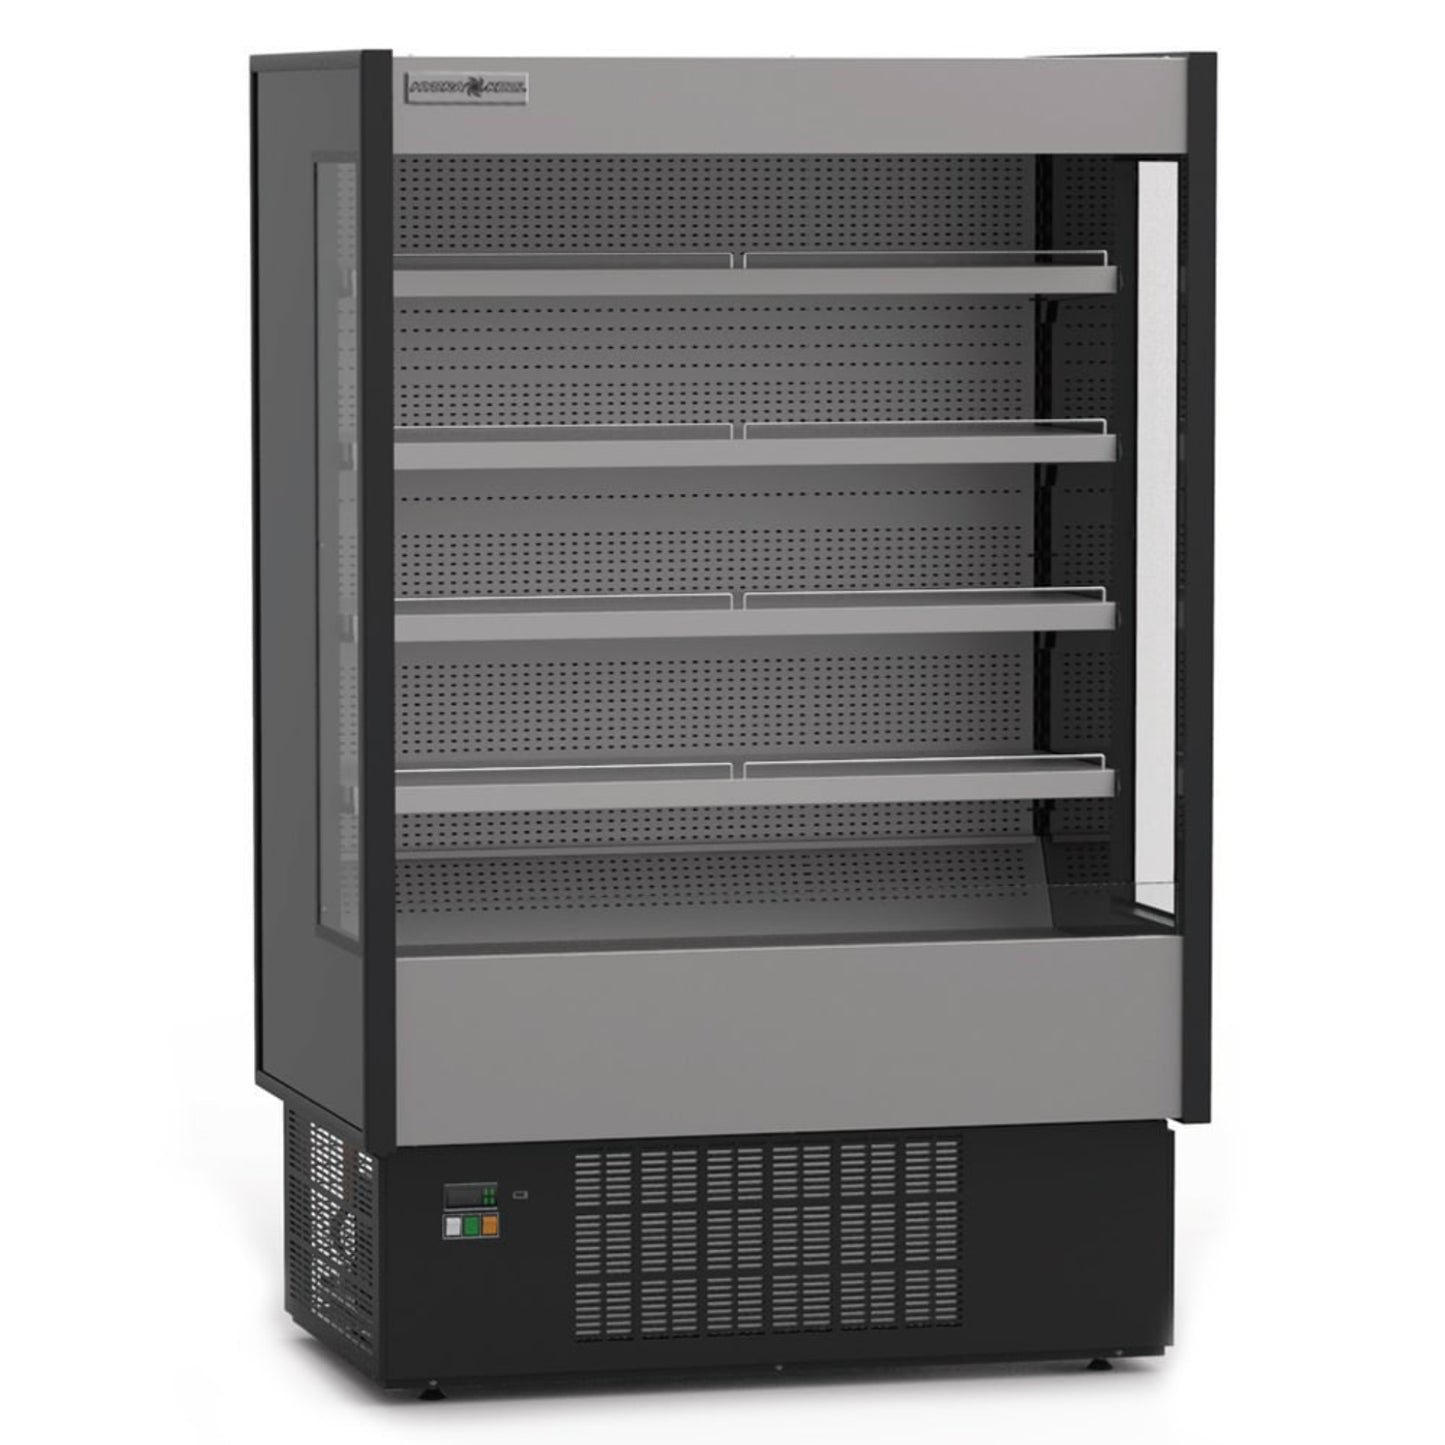 Hydra-Kool KGH-OF-100-S 100" Grab And Go High Profile Self-Contained